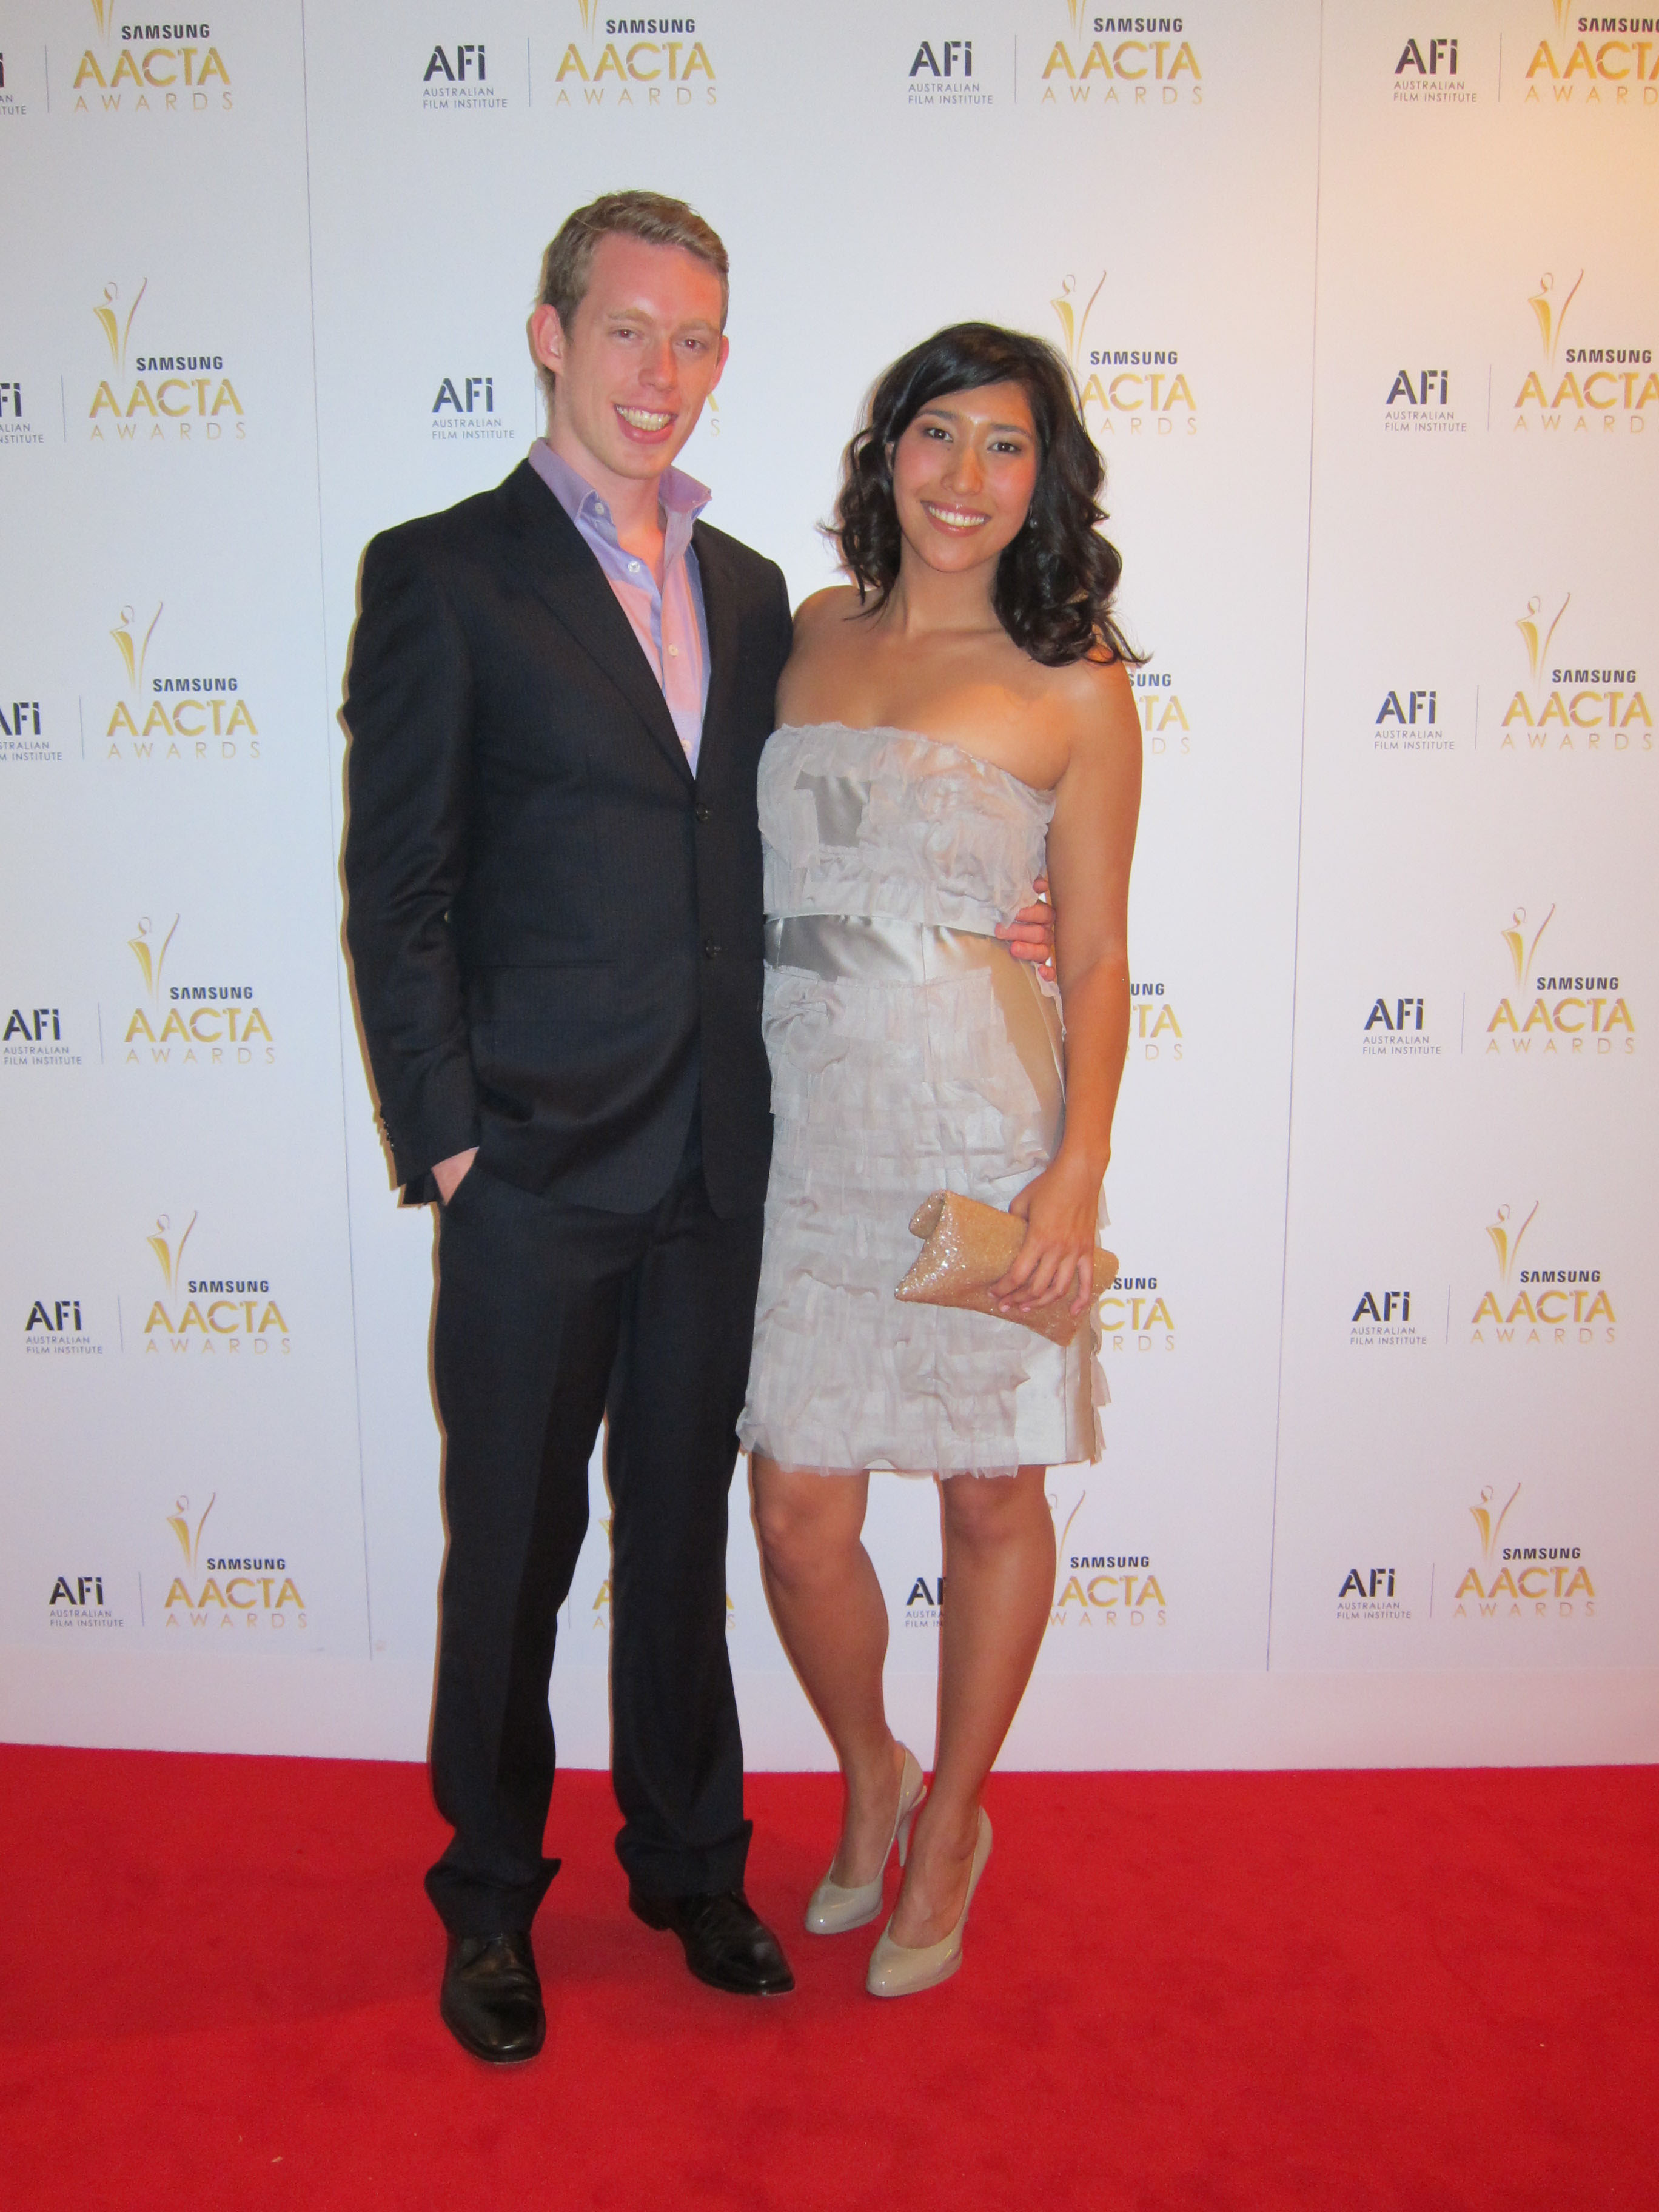 Emily Dean and friend at AFI | AACTA Awards, Sydney, 15 January 2012.